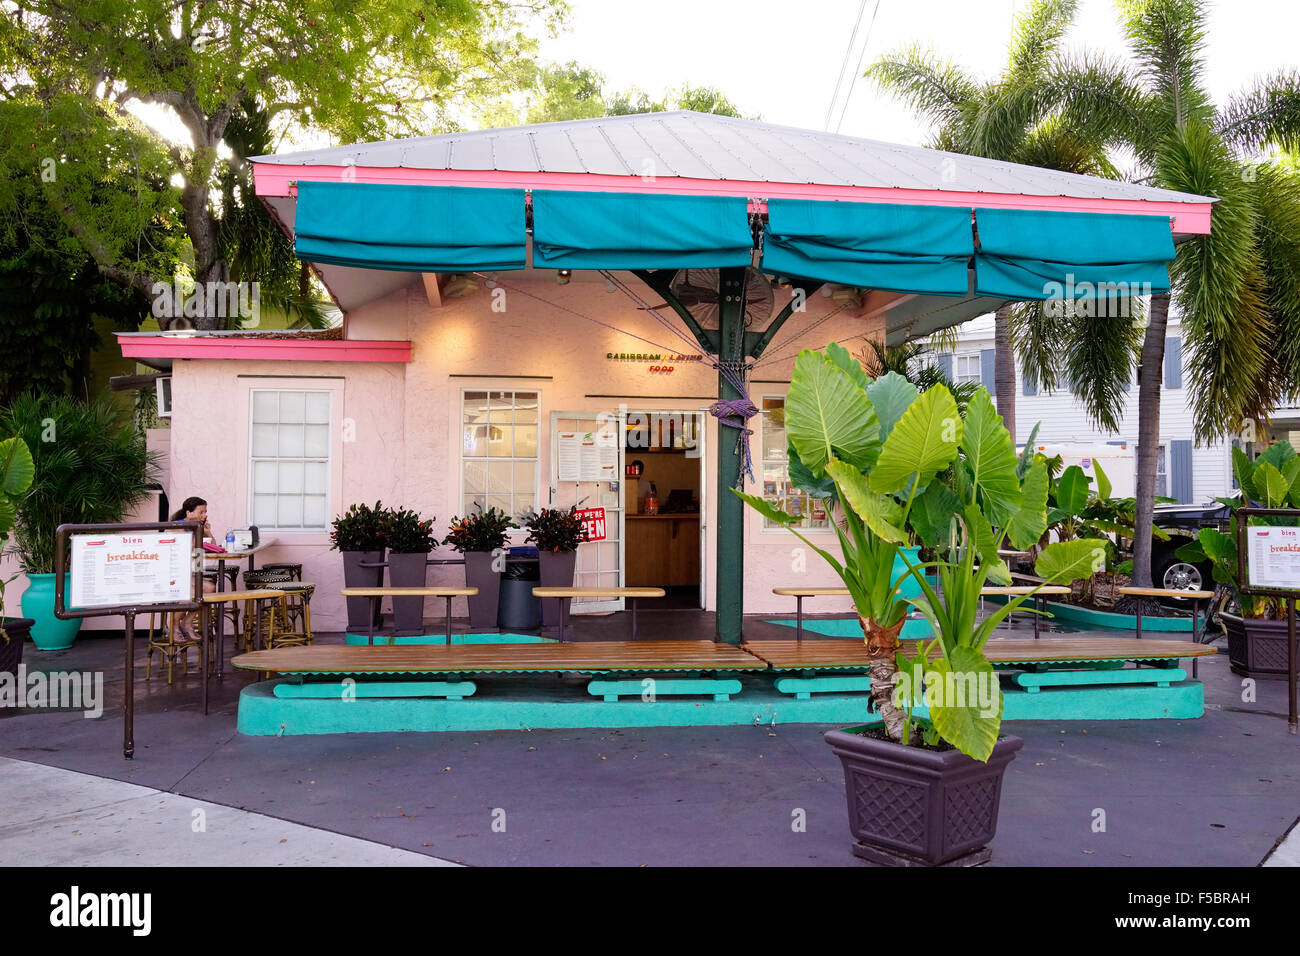 Bien Caribbean / Latino Restaurant,  Key West Florida USA Amazing food from an rehabbed gas station Stock Photo